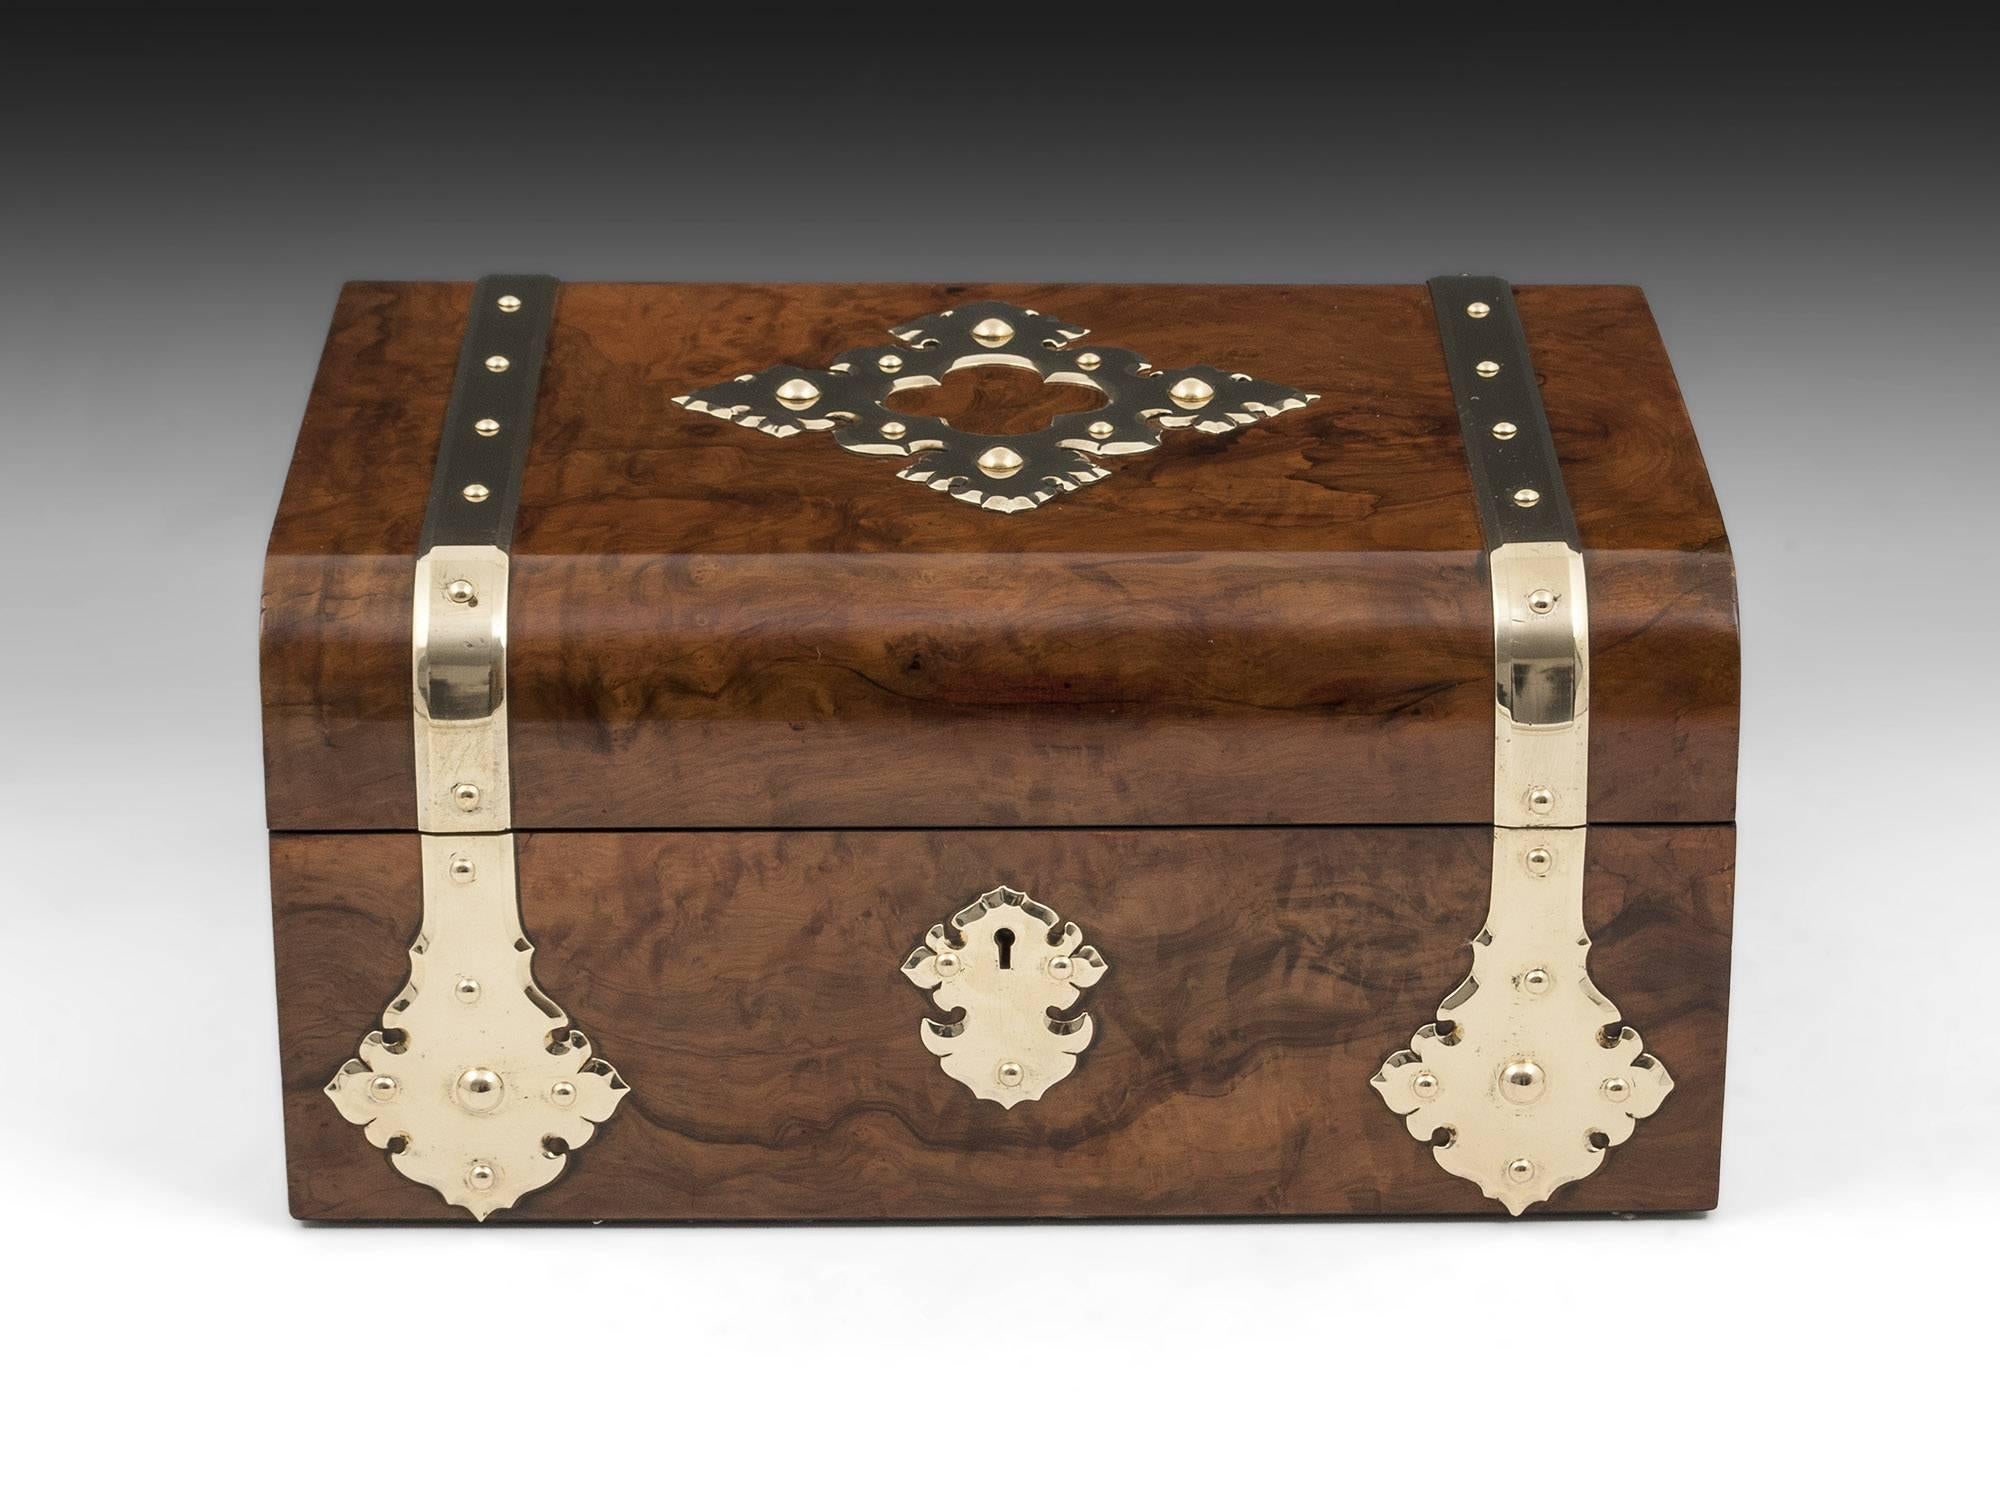 Antique Games Compendium veneered in Olive wood with ornate brass straps running from front to back, with matching ornate escutcheon. 

The antique games box interior is lined in red leather and blue watered silk, incorporating a red leather chess